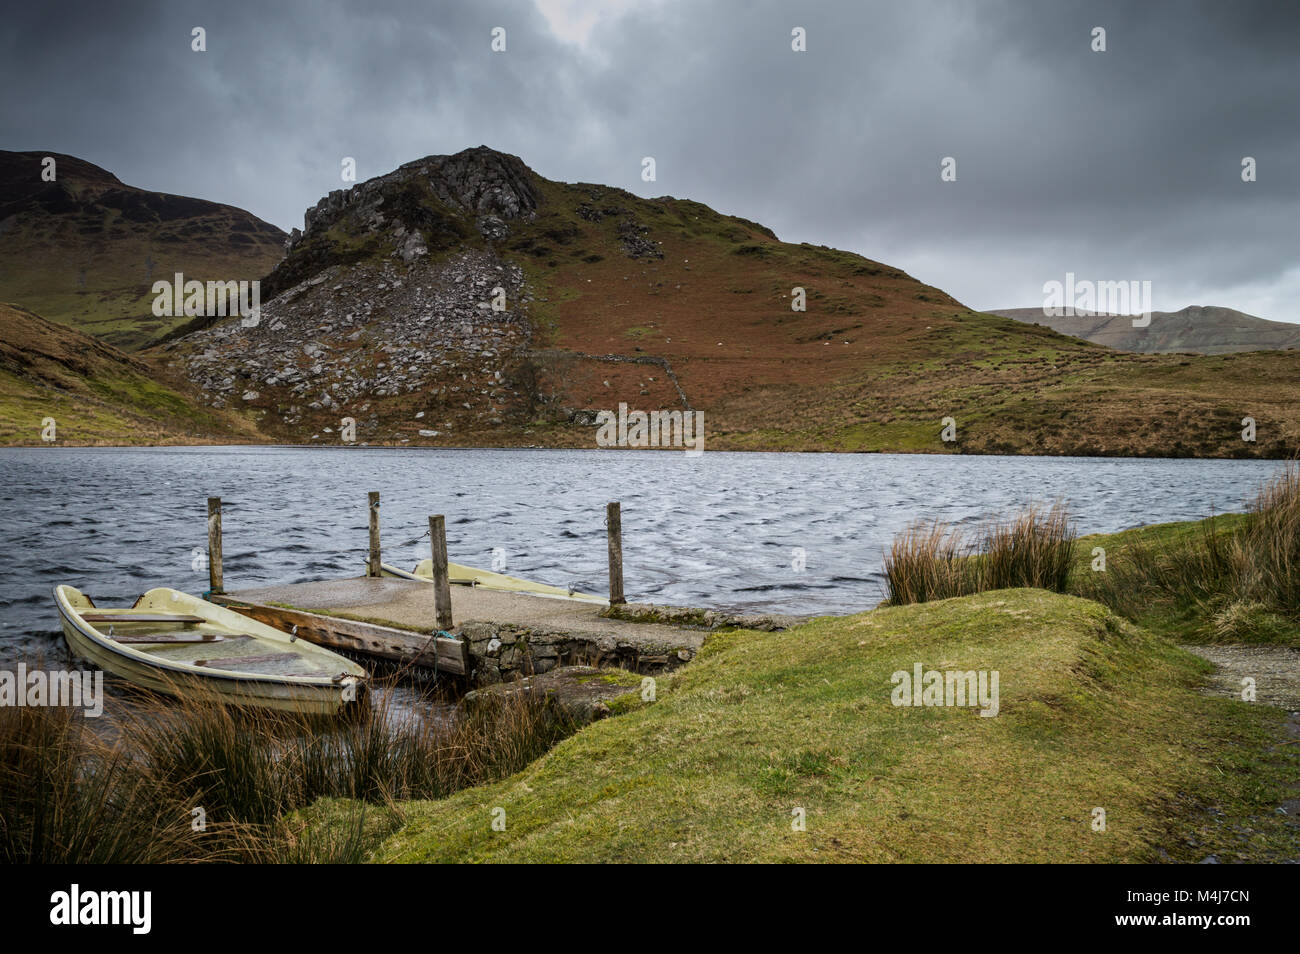 Two dilapidated boats moored at the jetty on Llyn Y Dywarchen in the Snowdonia National Park, Wales. Stock Photo